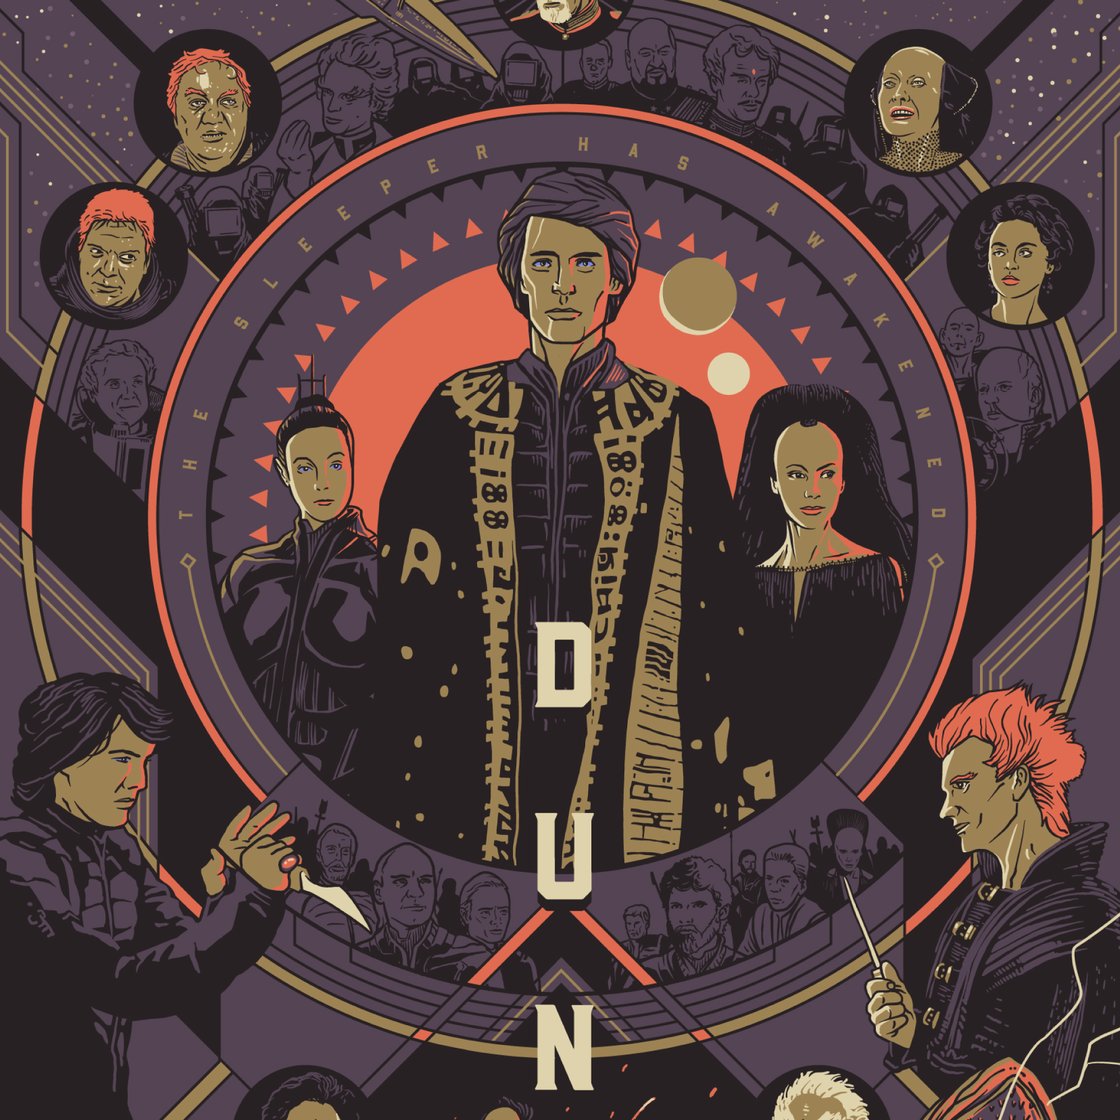 Image of Dune 1984 movie poster